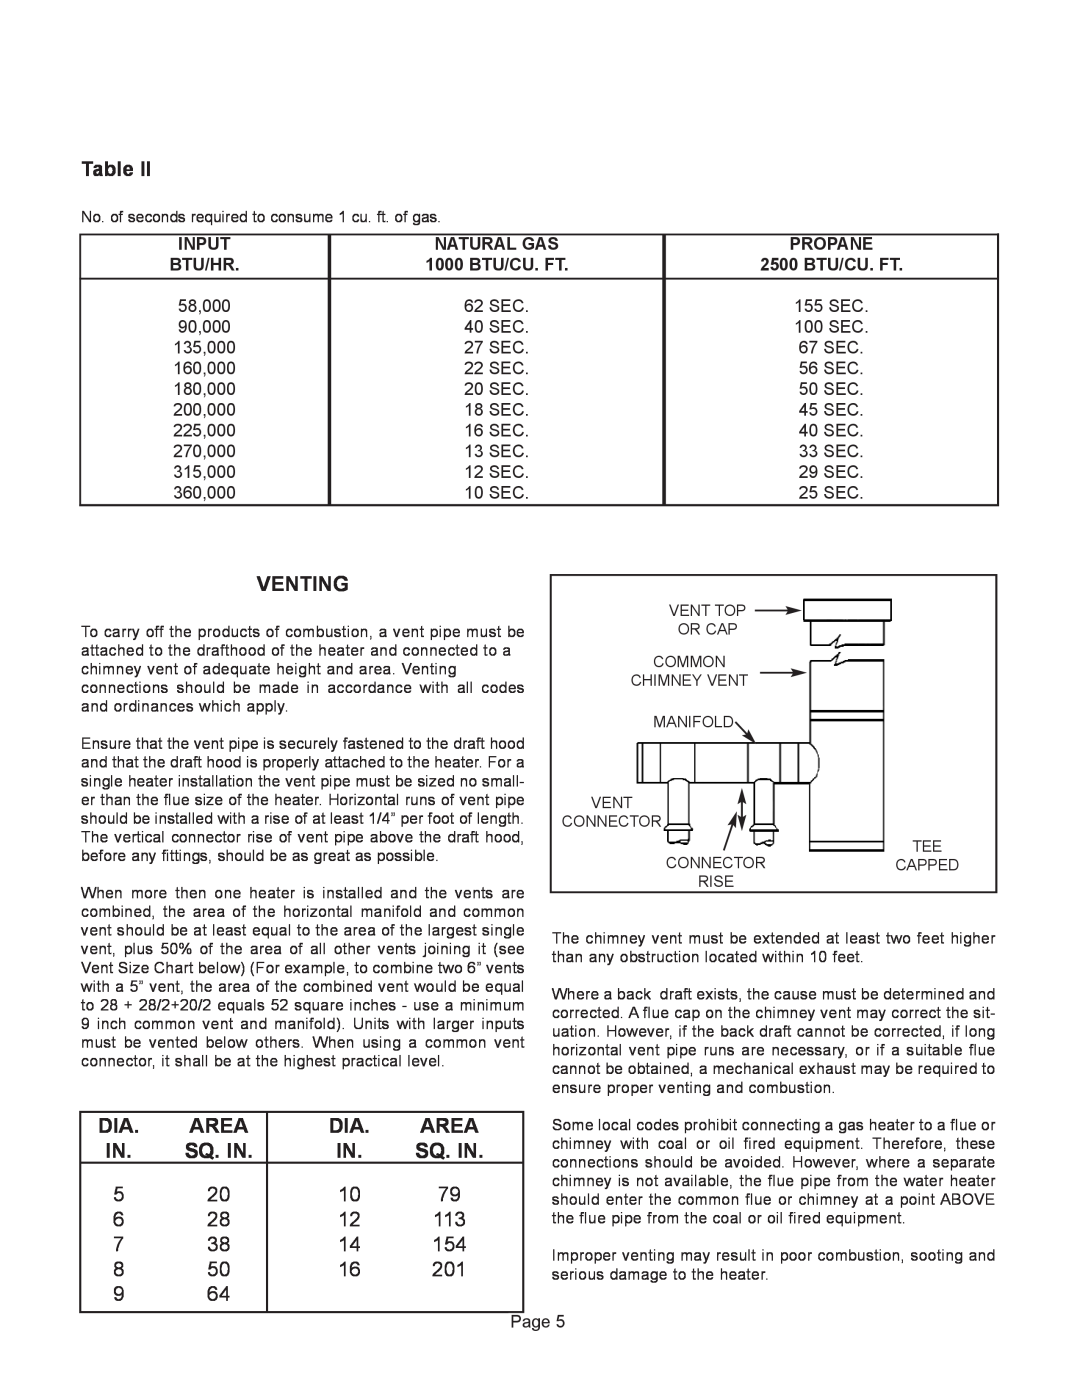 GSW G65 instruction manual Venting, Area, Sq. In 